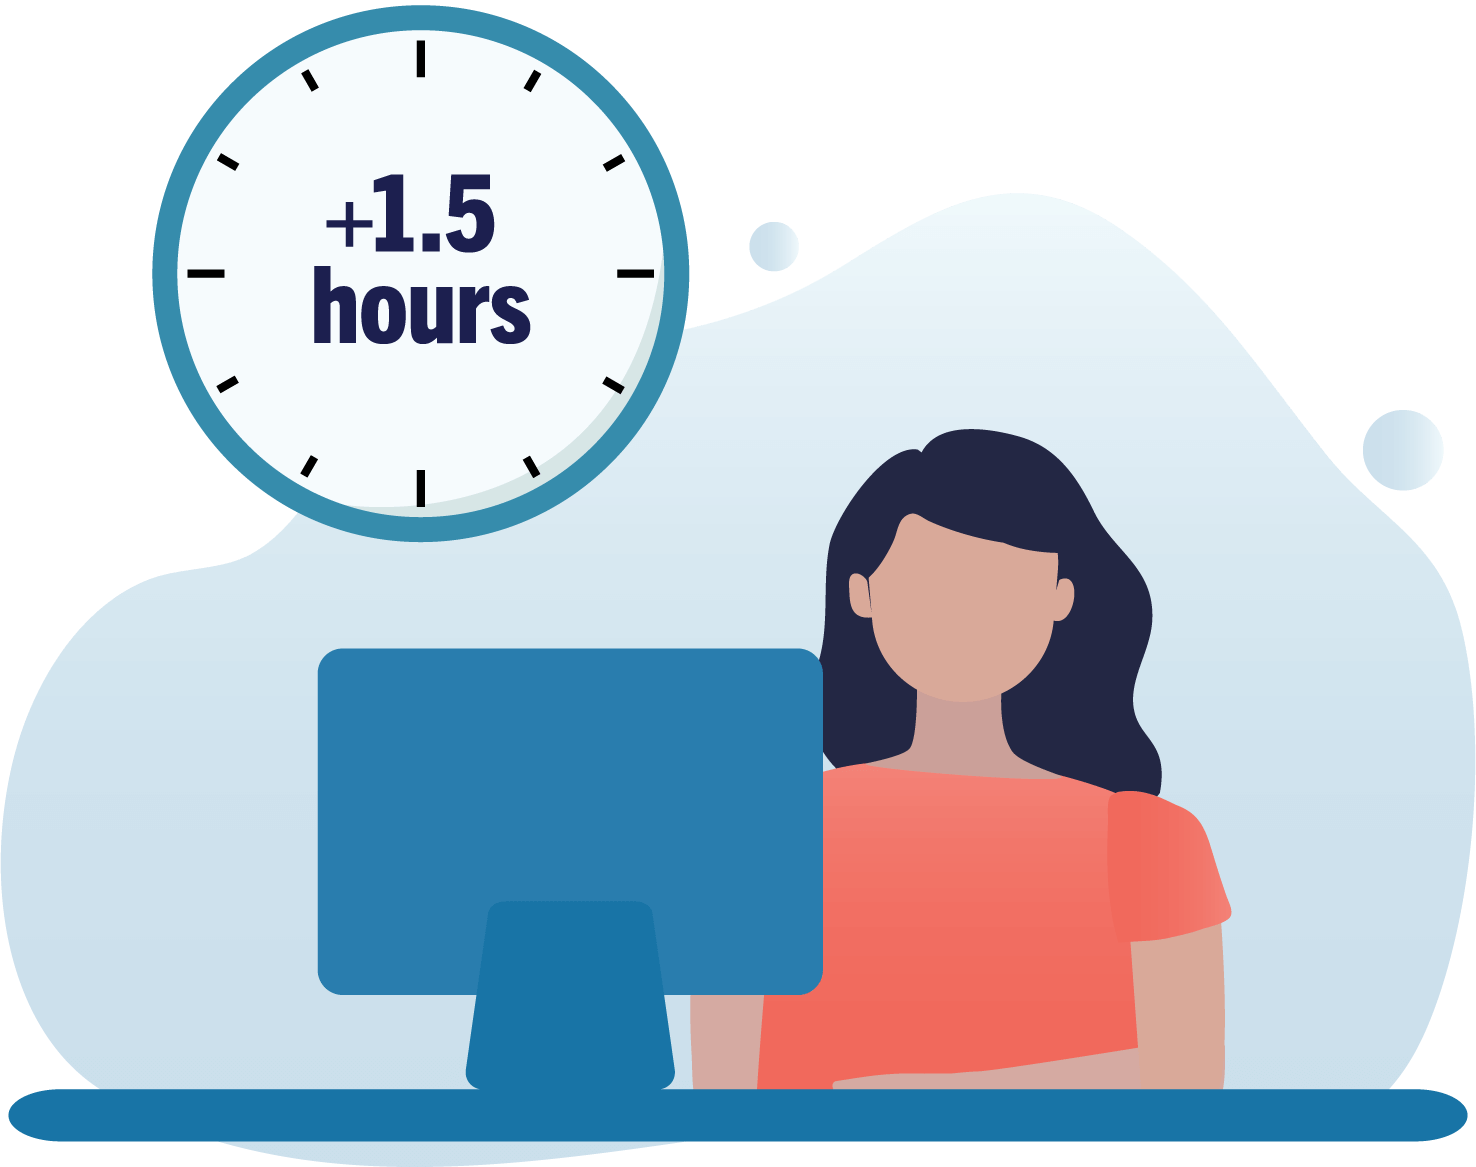 Working from home means an individual will sit at their work station an average of 1.5 hours more than when in a typical office setting. 